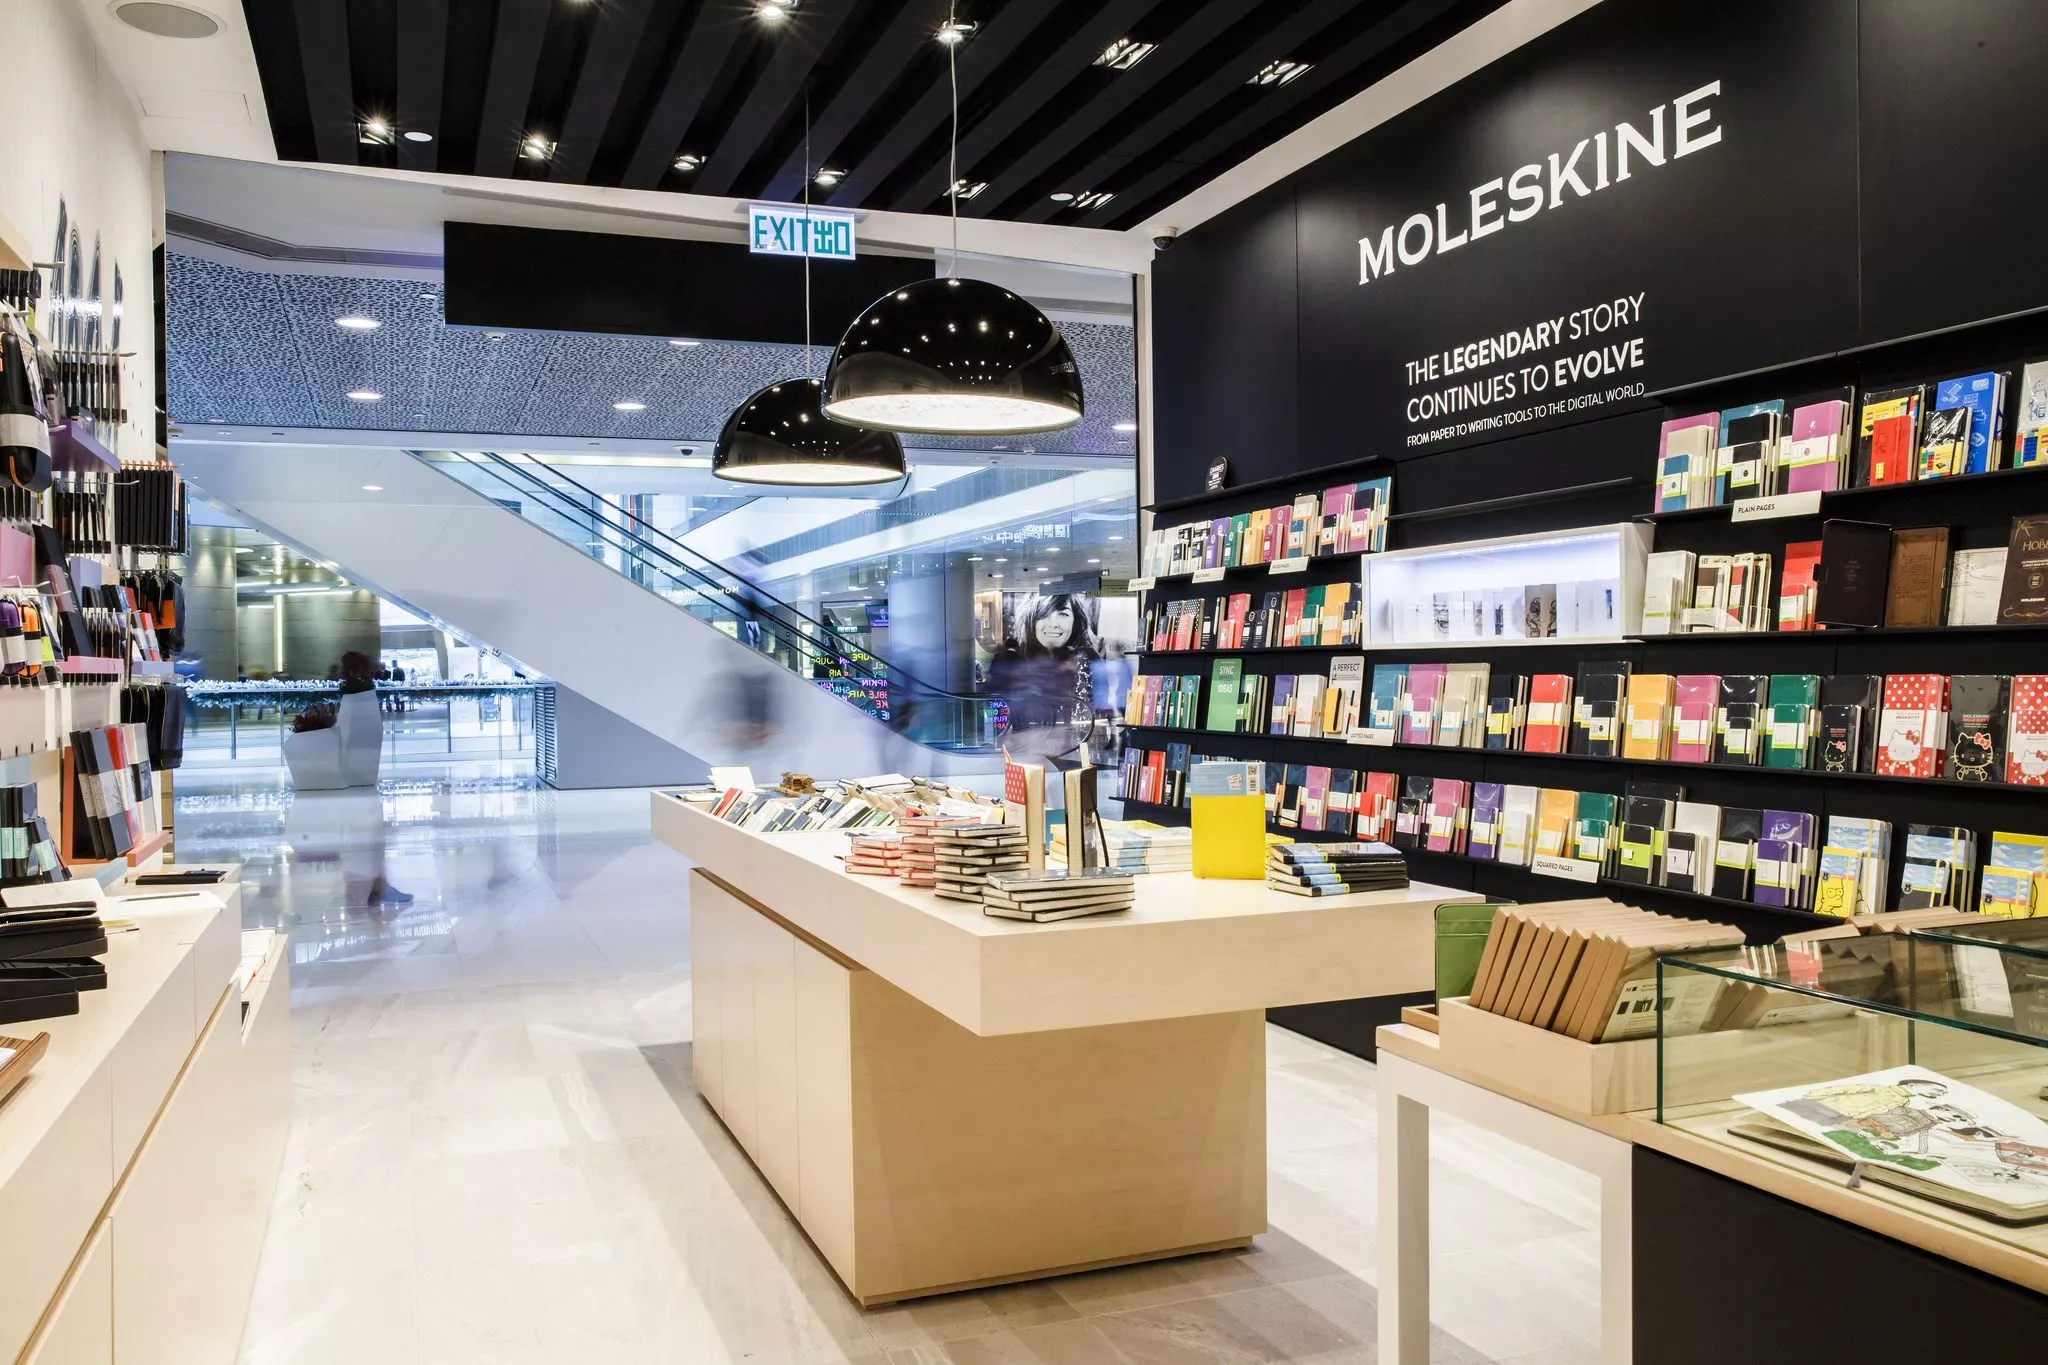 Moleskine Store in Italy, europe | Other Crafts - Country Helper